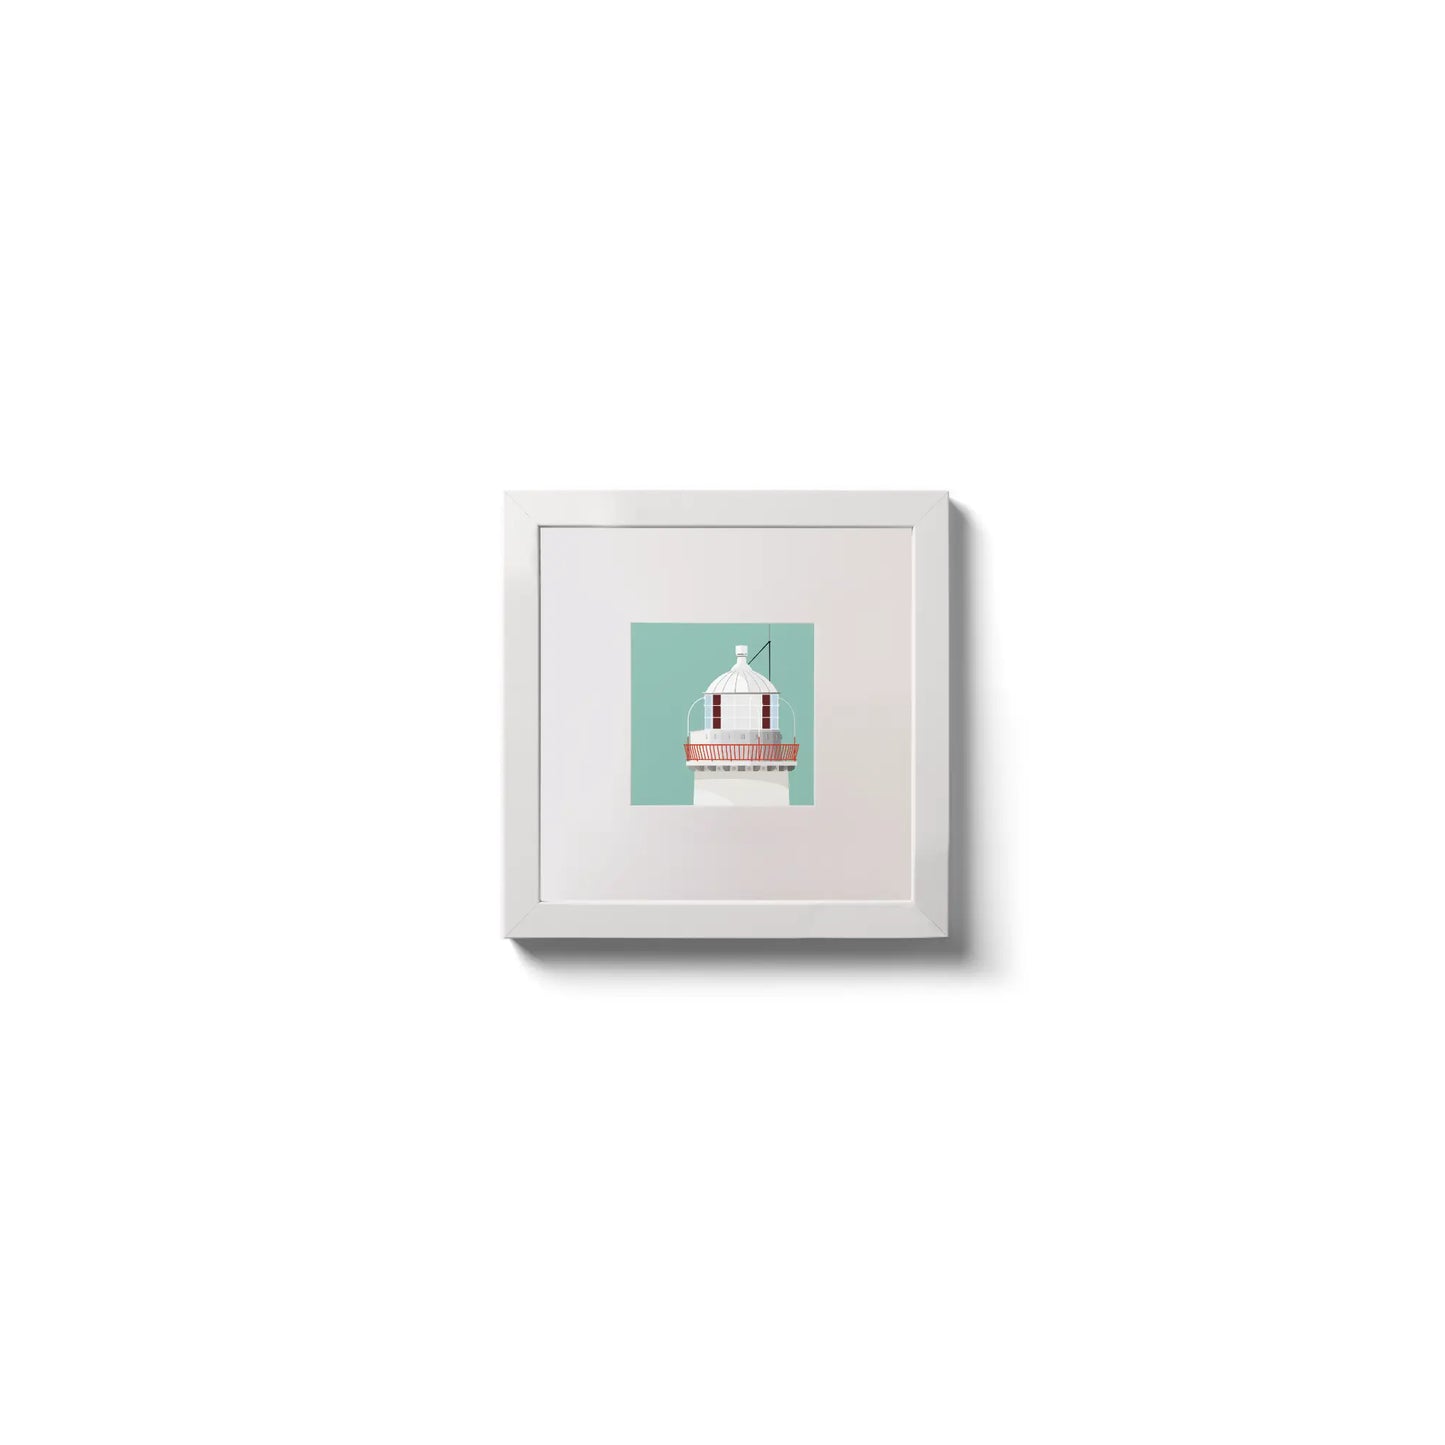 Illustration of Broadhaven lighthouse on an ocean green background,  in a white square frame measuring 10x10cm.